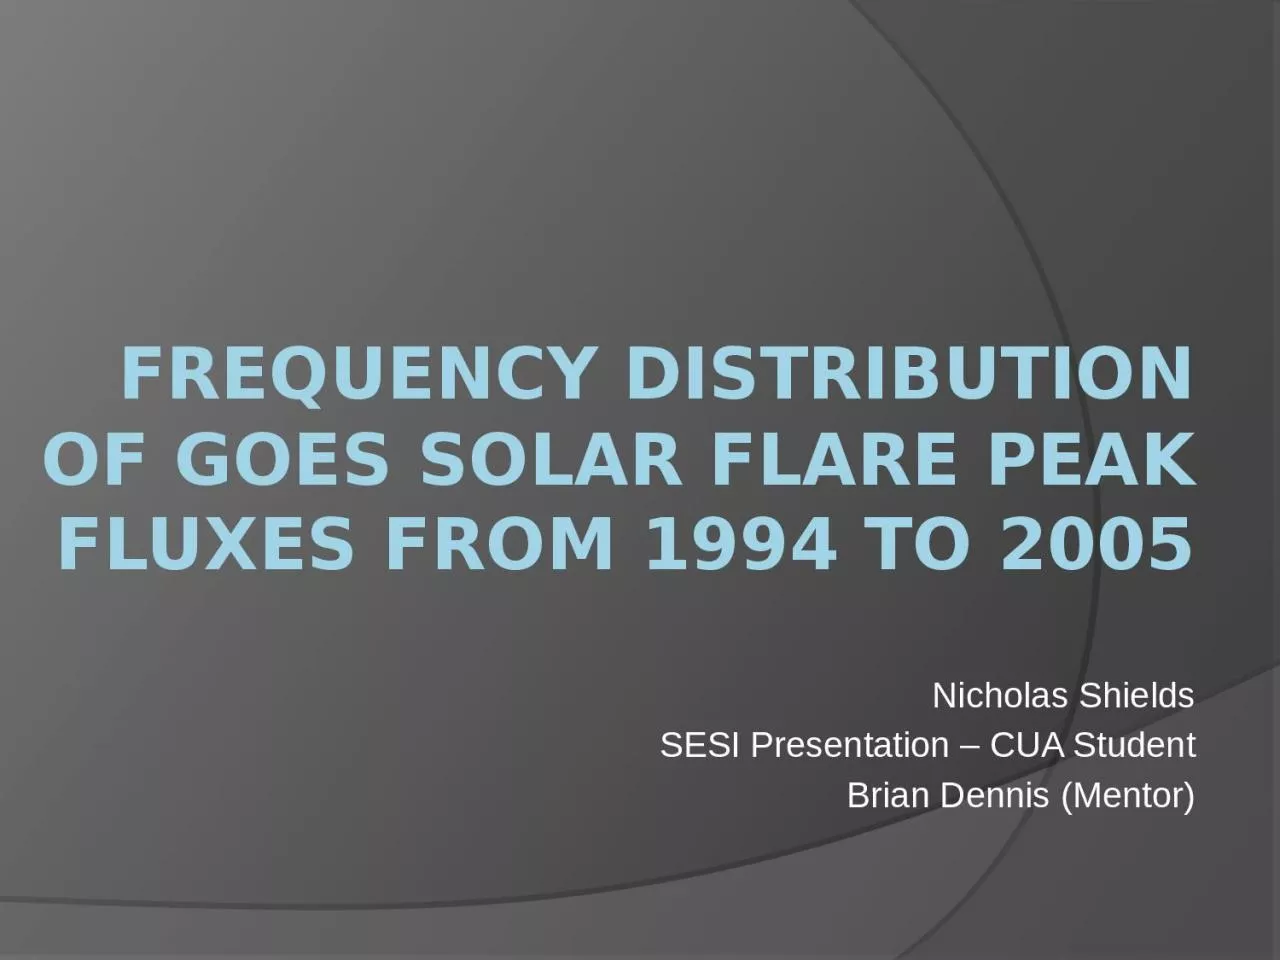 Frequency Distribution of GOES Solar Flare Peak Fluxes from 1994 to 2005